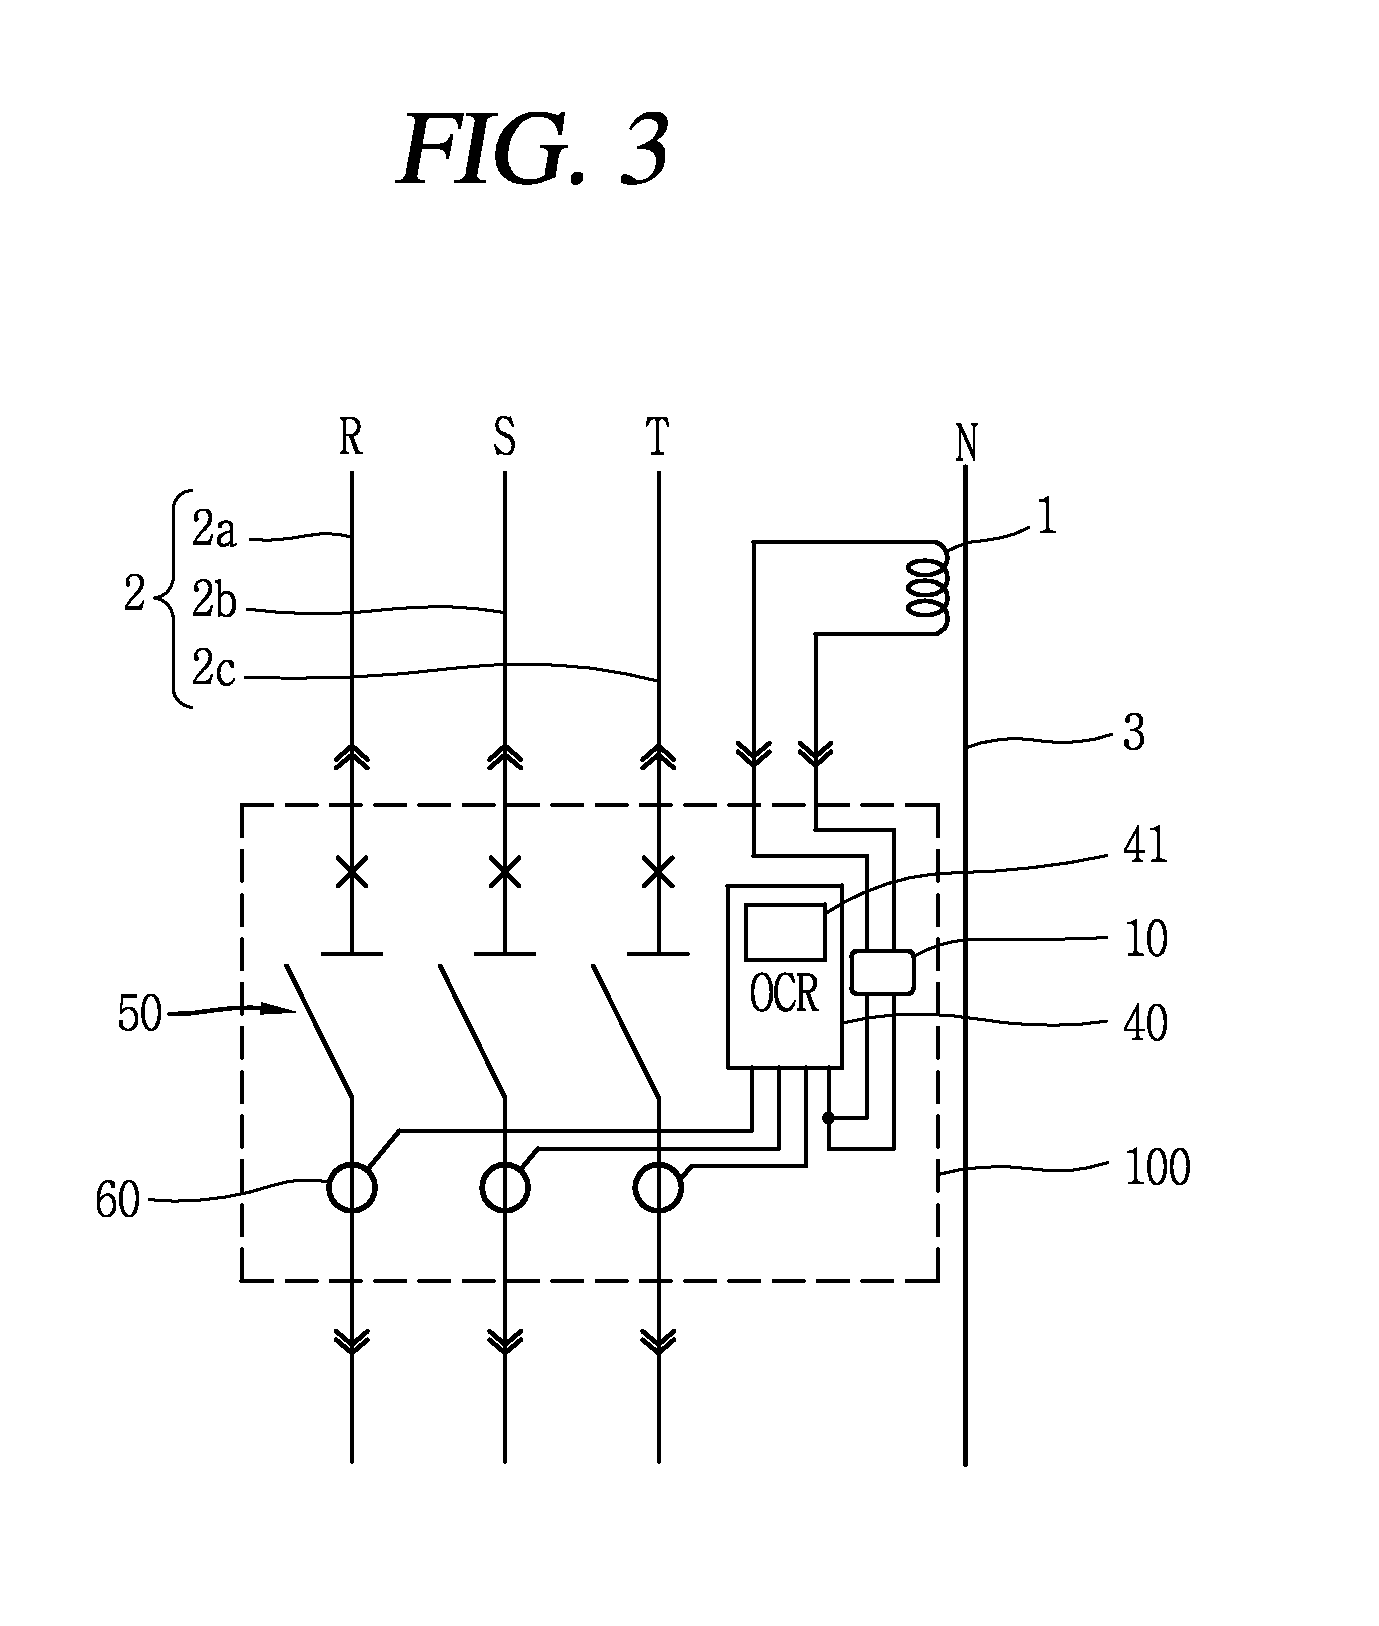 Neutral pole current transformer module for circuit breaker and neutral pole current detecting apparatus for circuit breaker